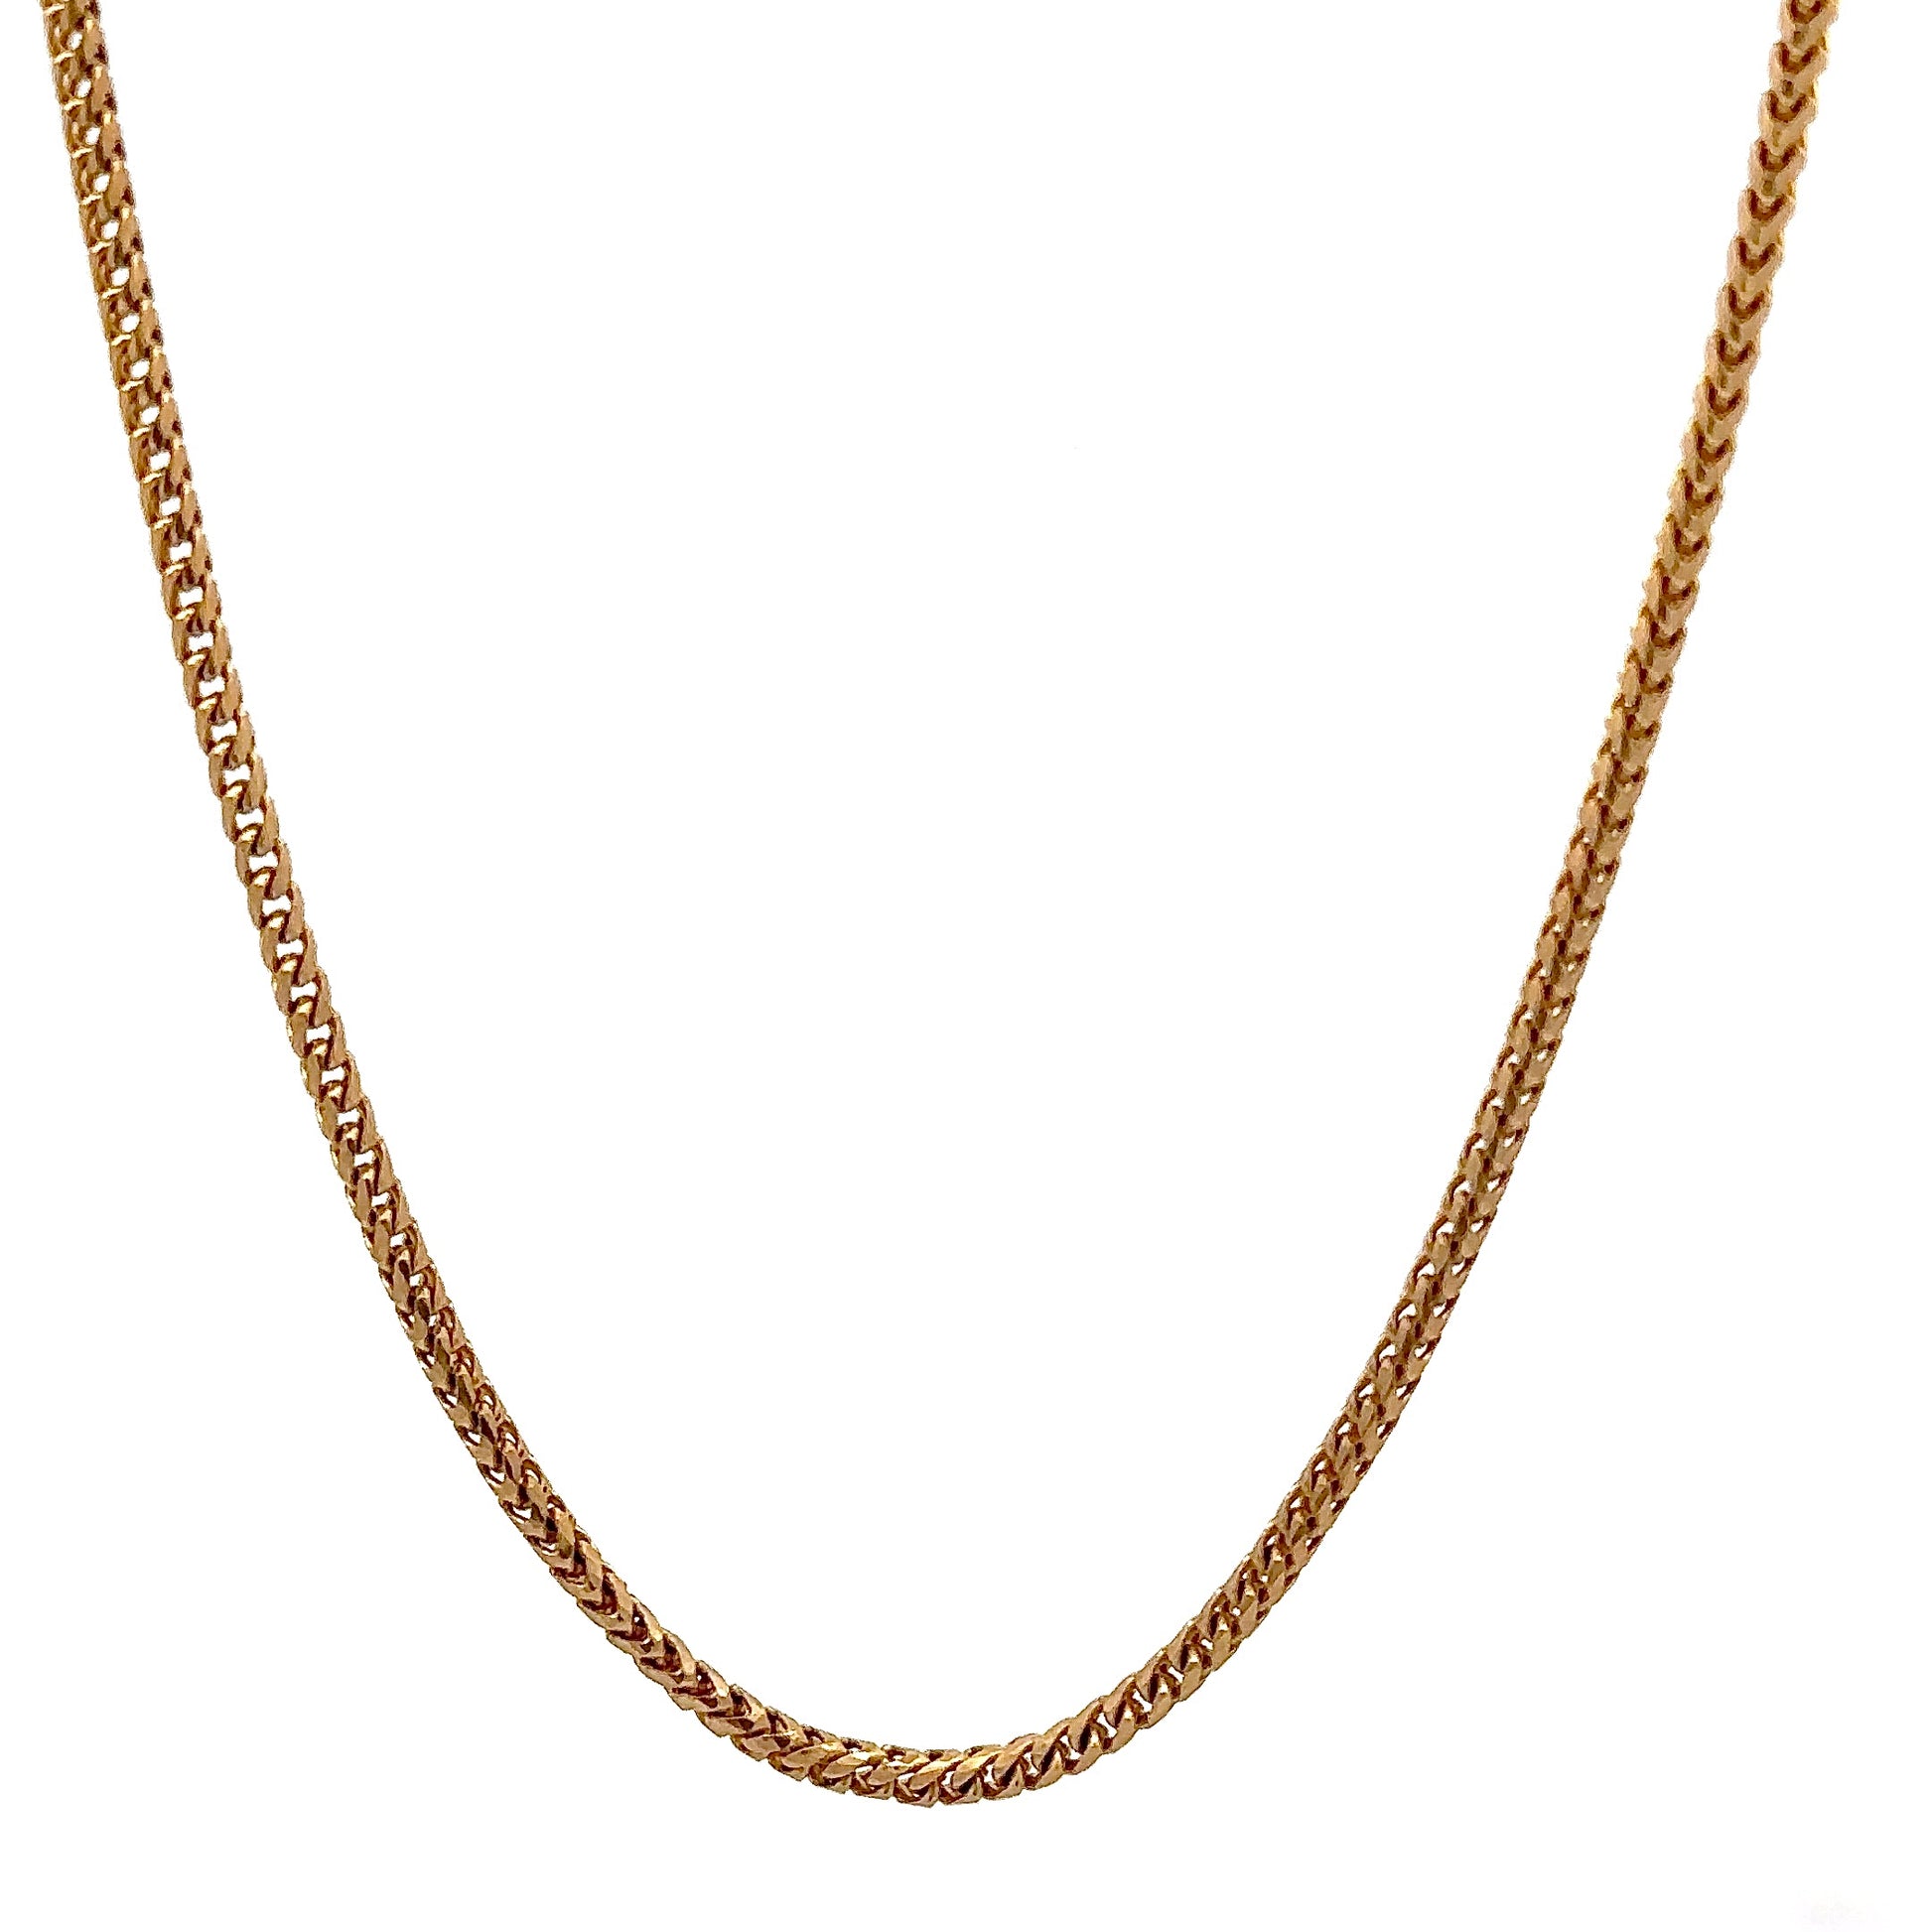 Round style yellow gold franco chain